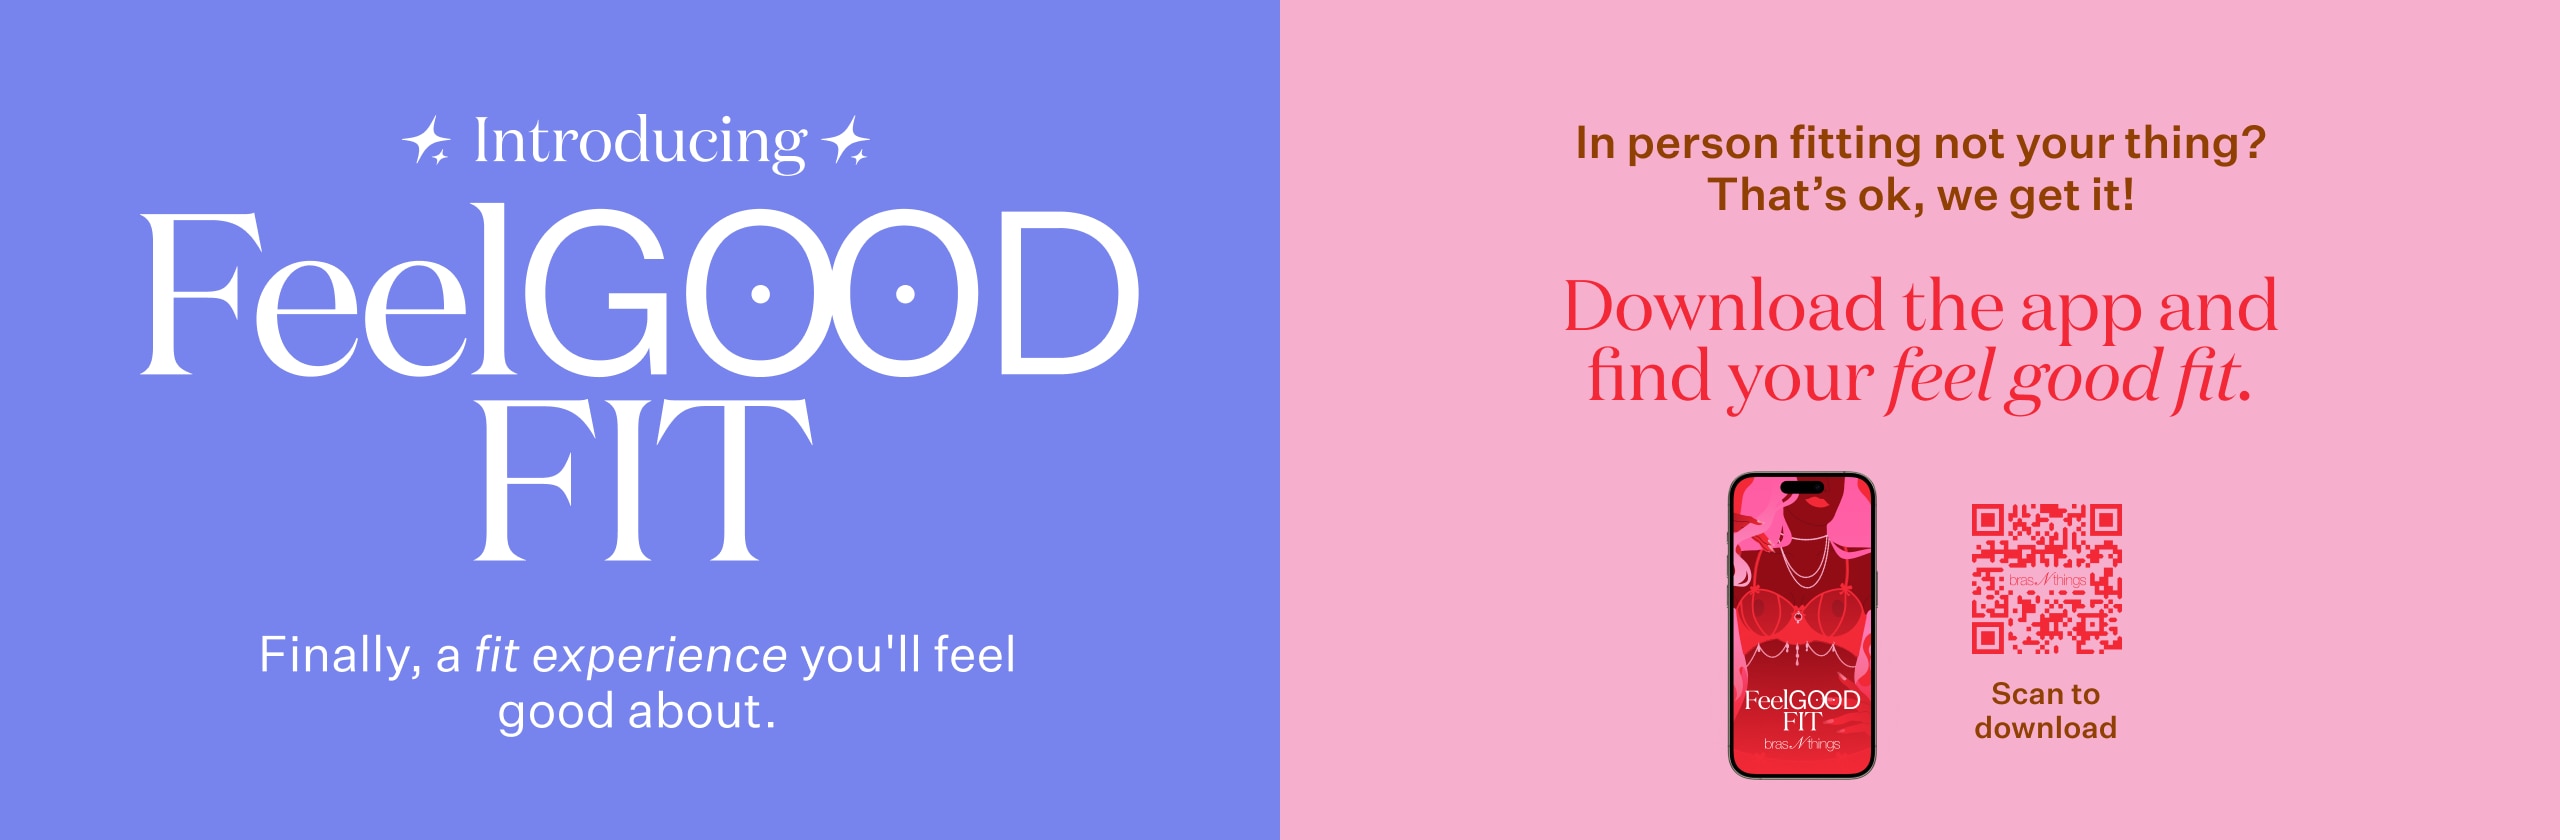 Download the app and find your feel good fit!